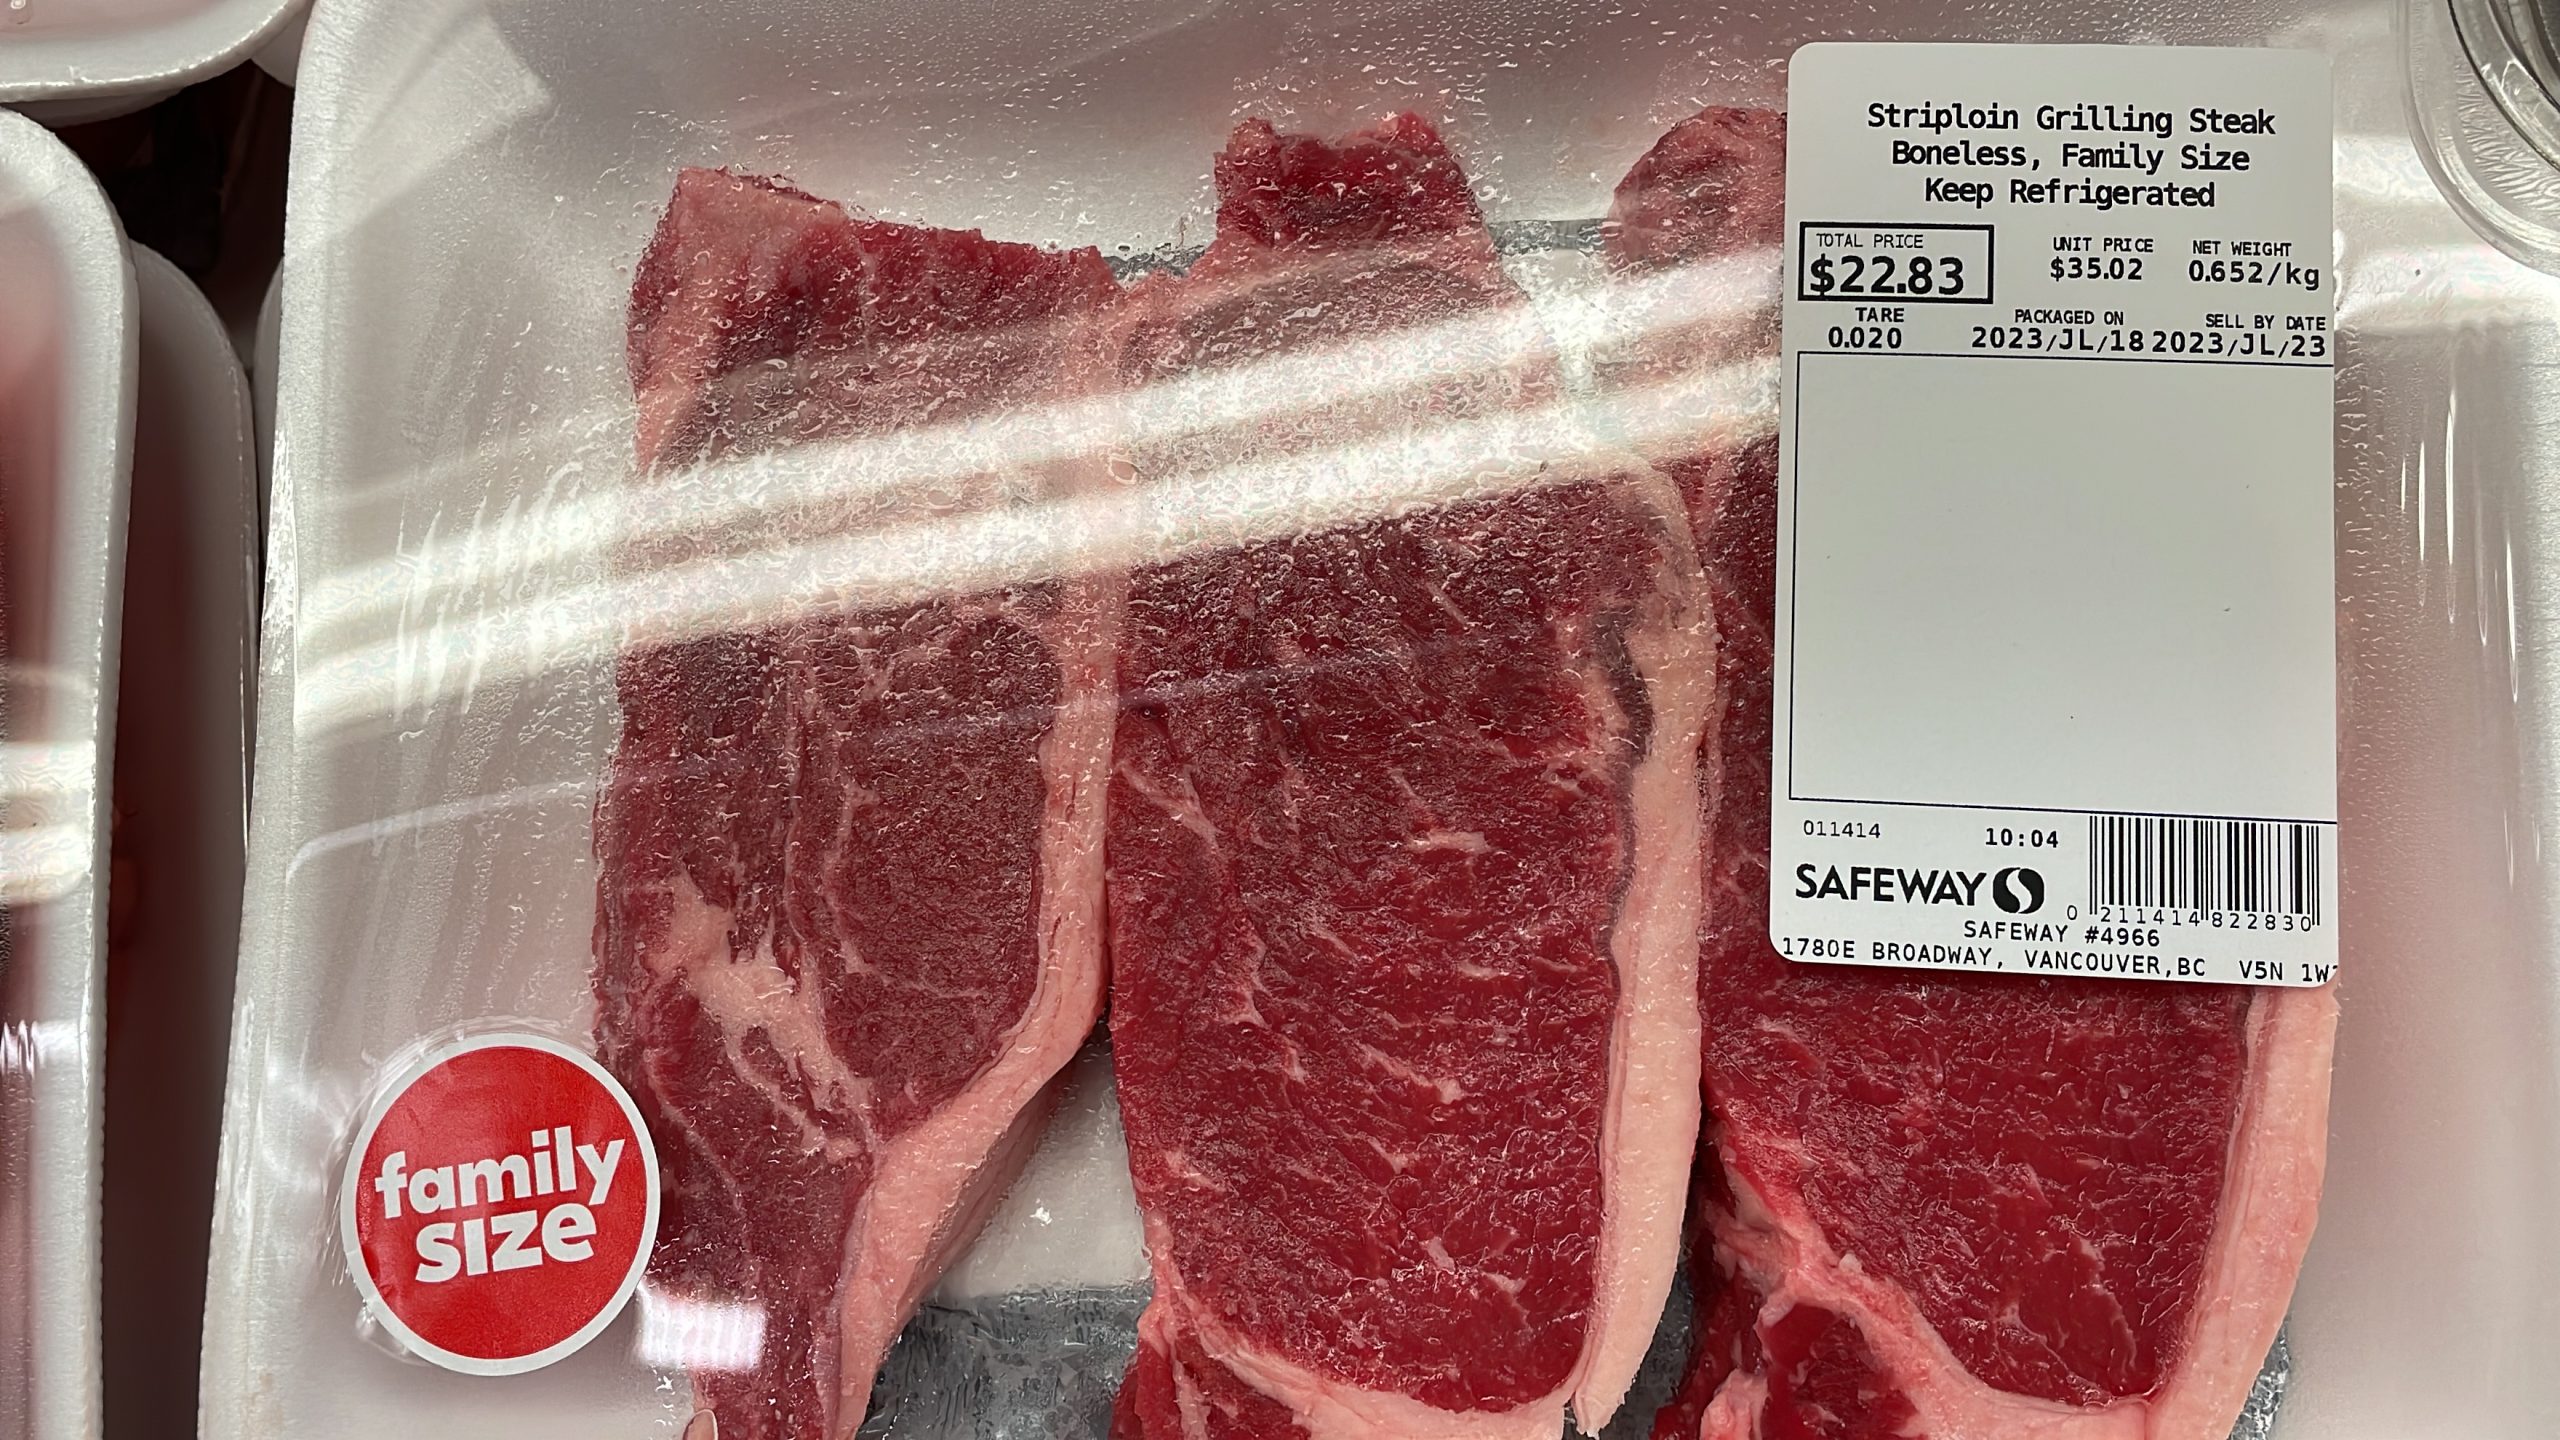 A pack of striploin steak being sold for $22.83 at a Metro Vancouver grocery store on July 18, 2023